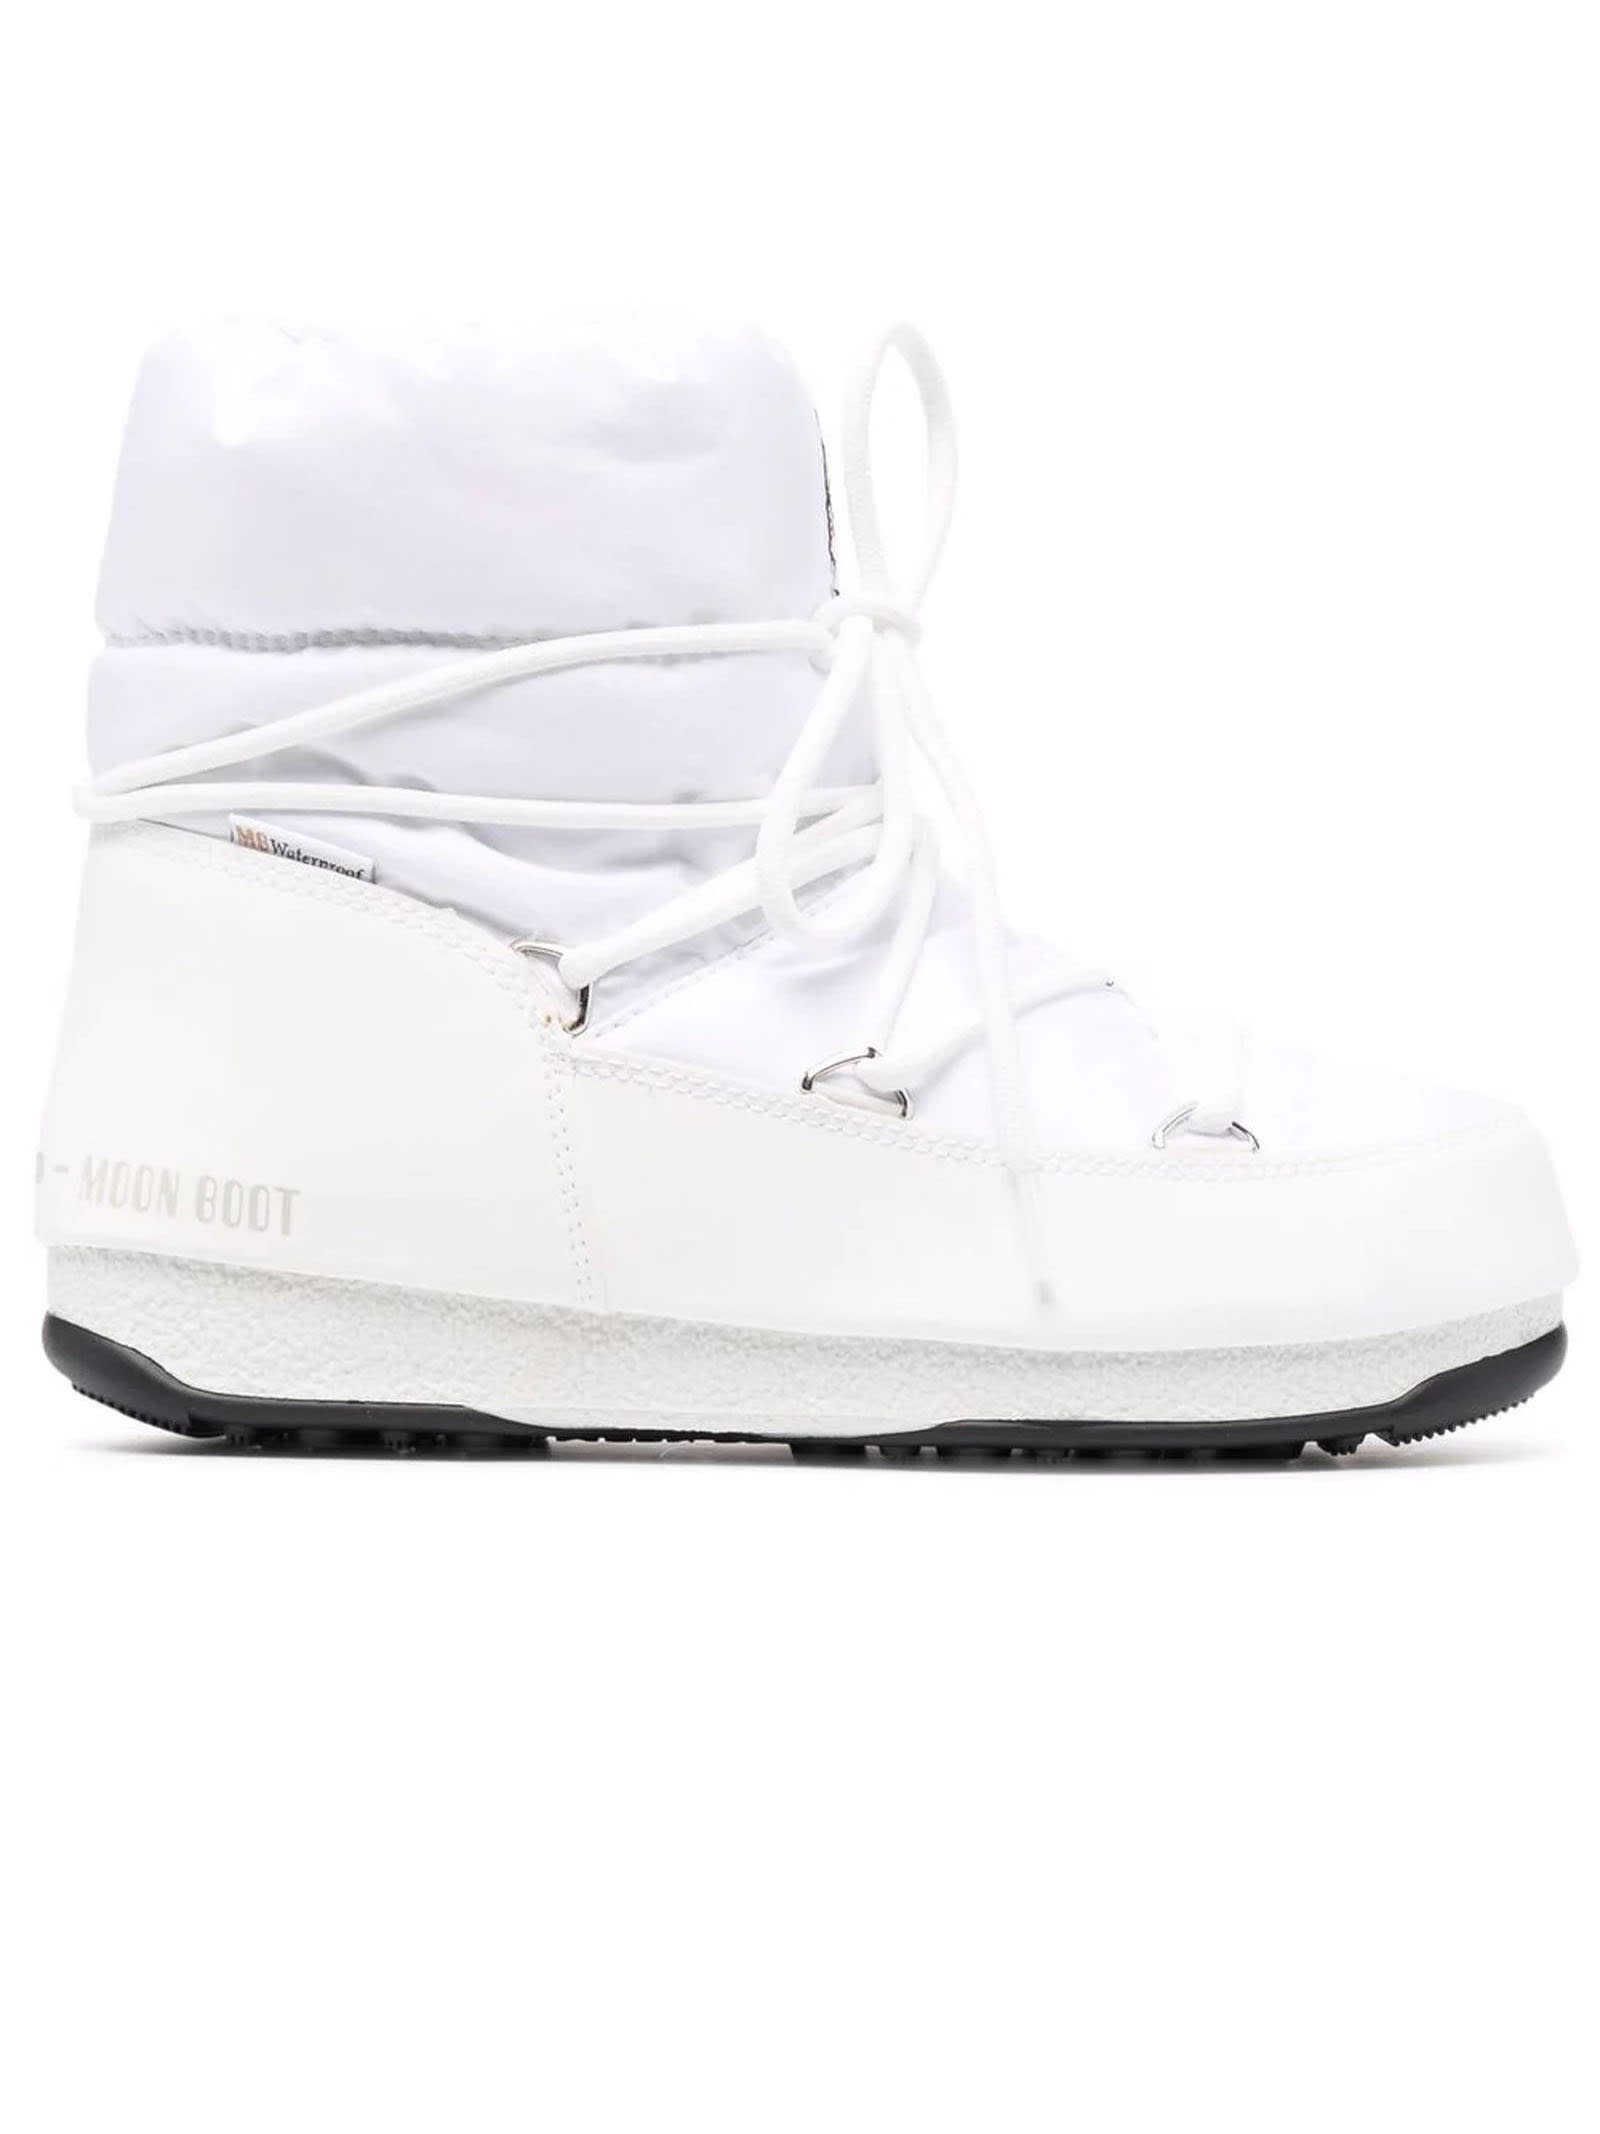 Moon Boot Protecht Low White Nylon Boots